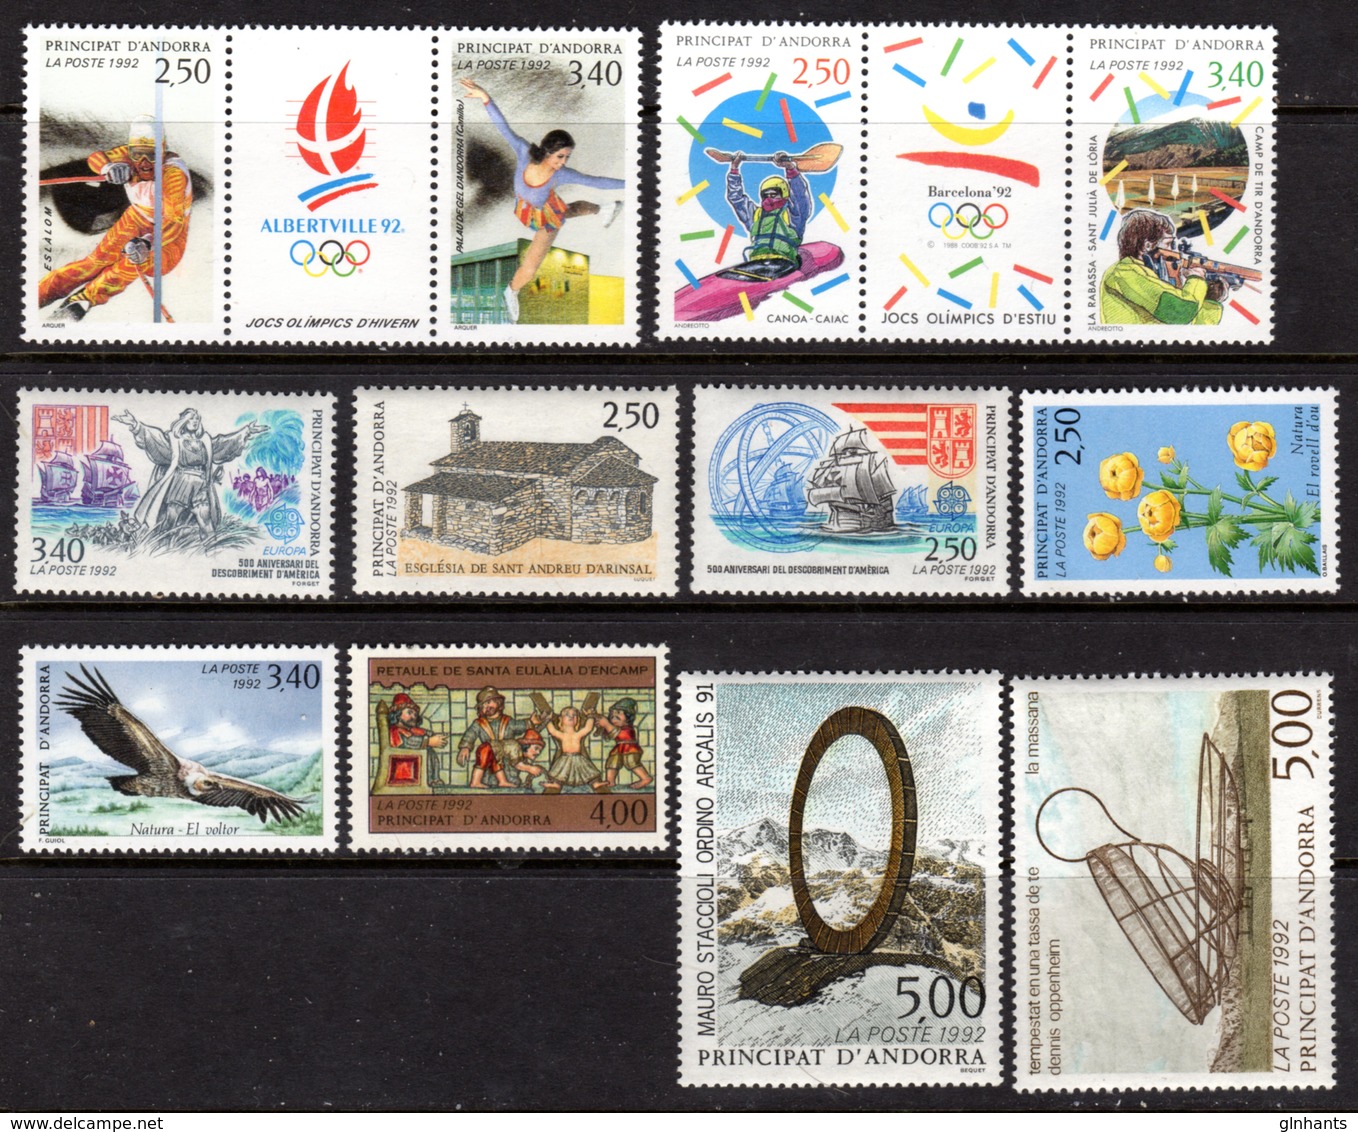 FRENCH ANDORRA - 1992 COMPLETE YEAR SET FINE MNH ** SG F456-467 + LABELS - Collections